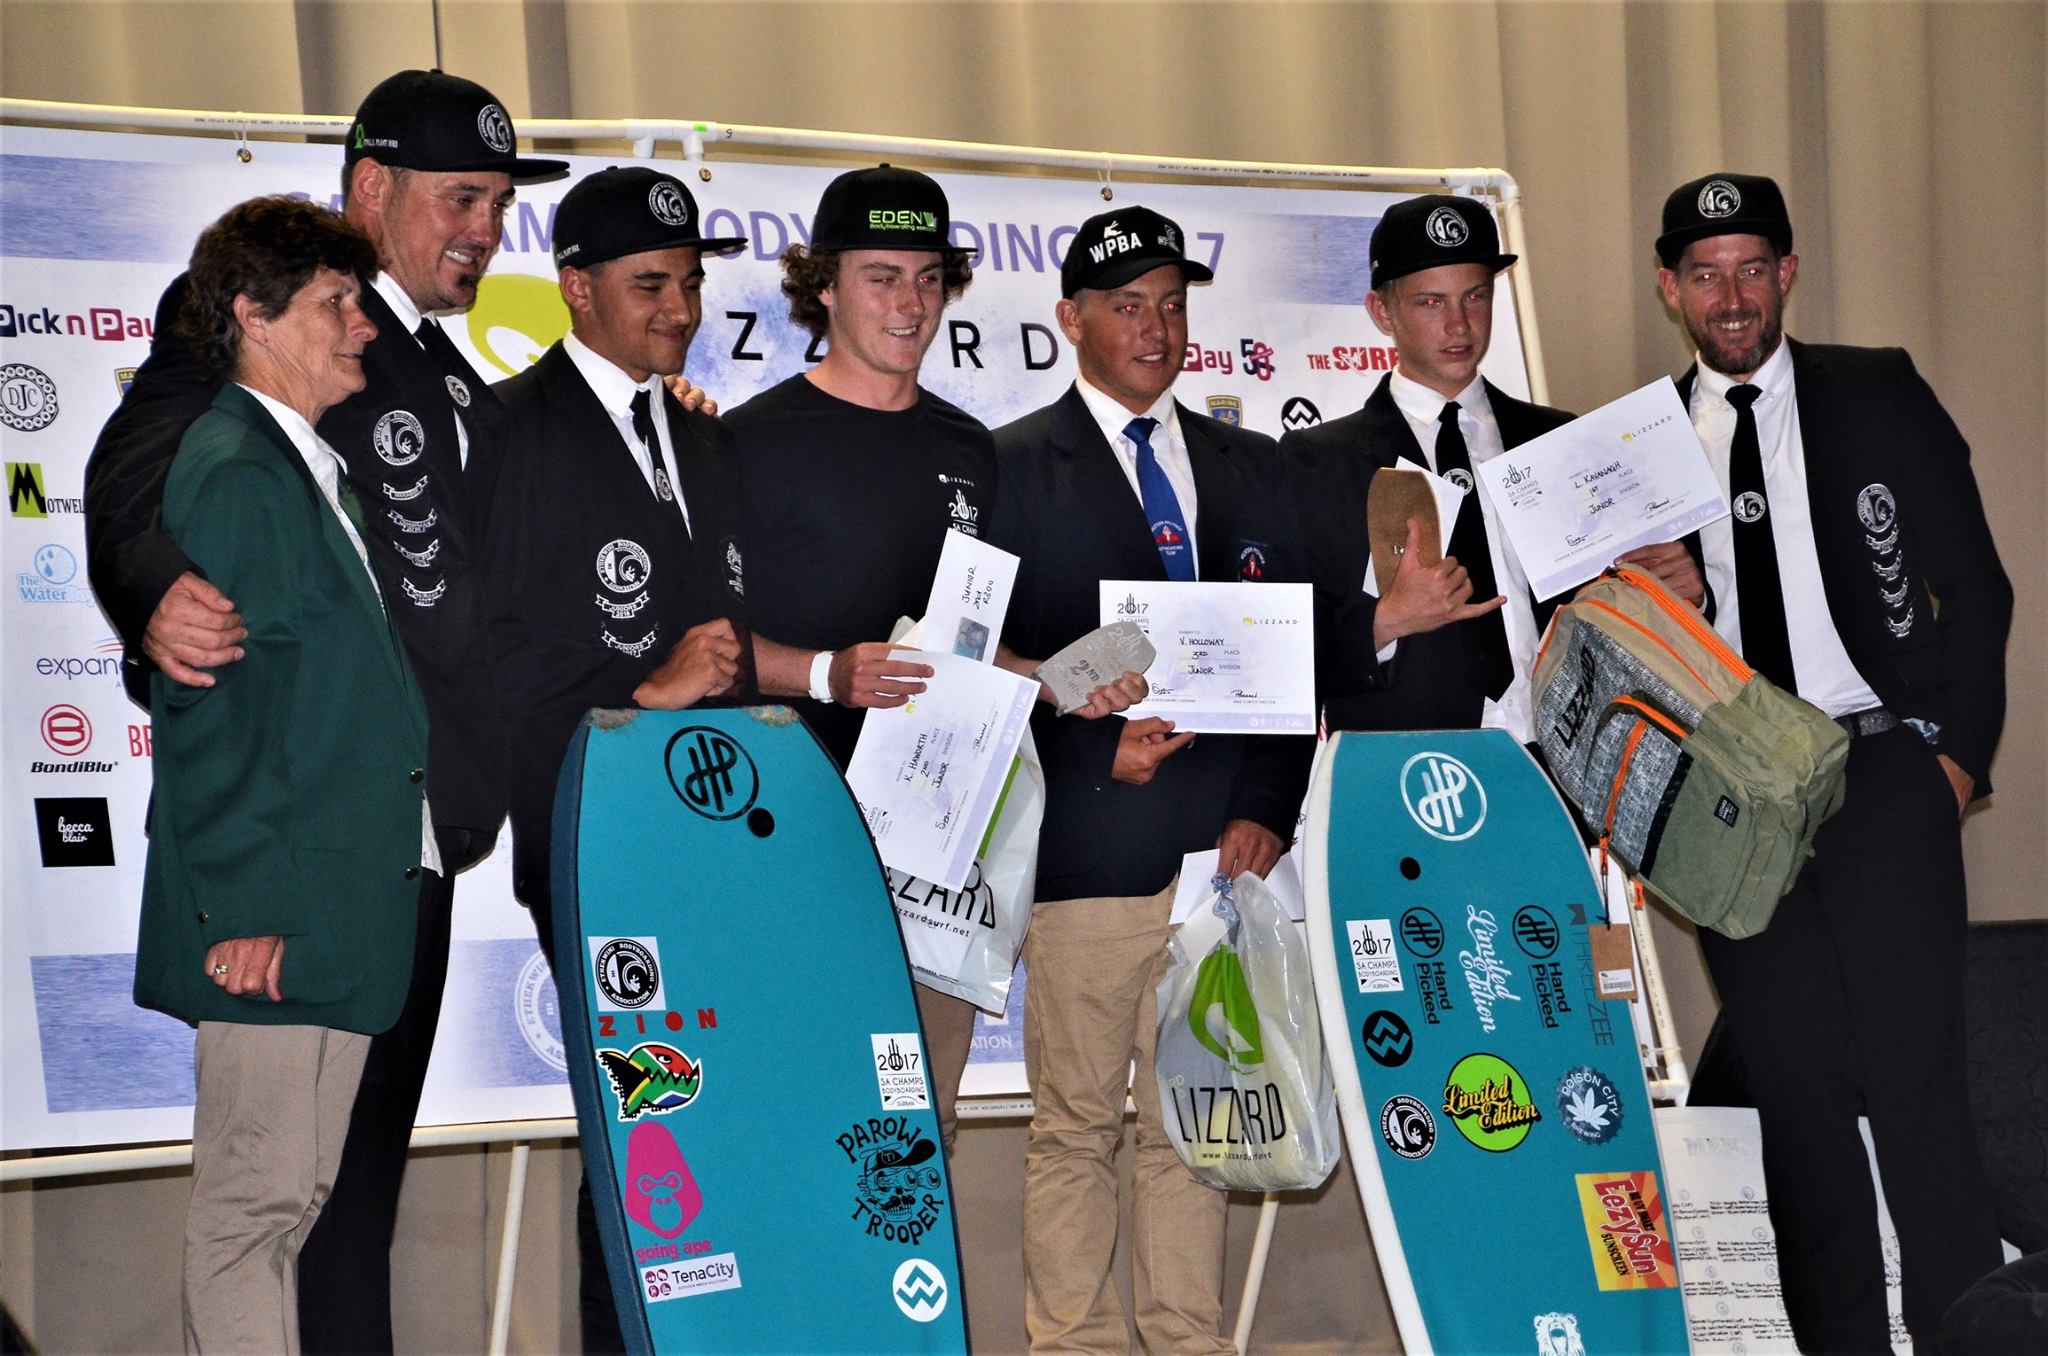 Kade receiving his prize at the Juniors SA Body Boarding Champs